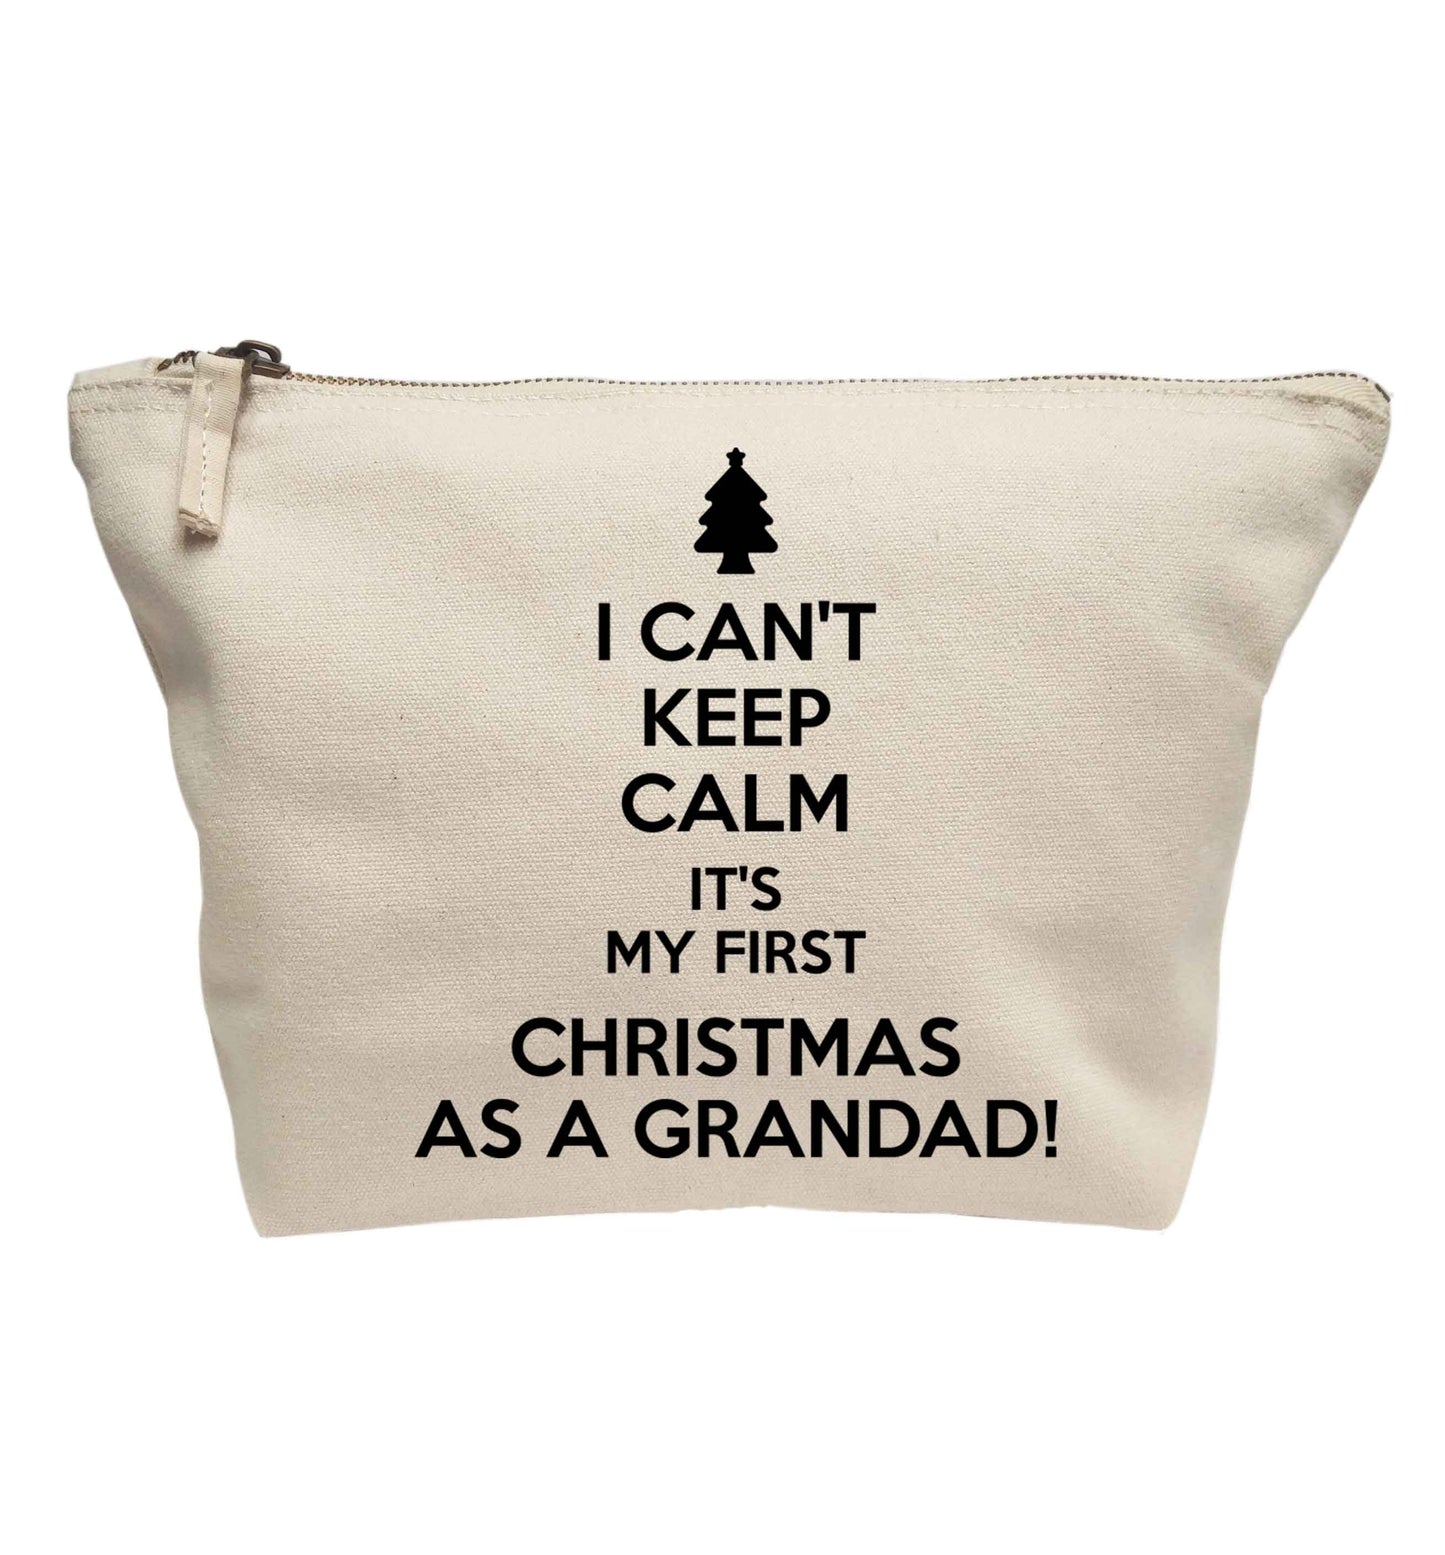 I can't keep calm it's my first Christmas as a grandad! | makeup / wash bag